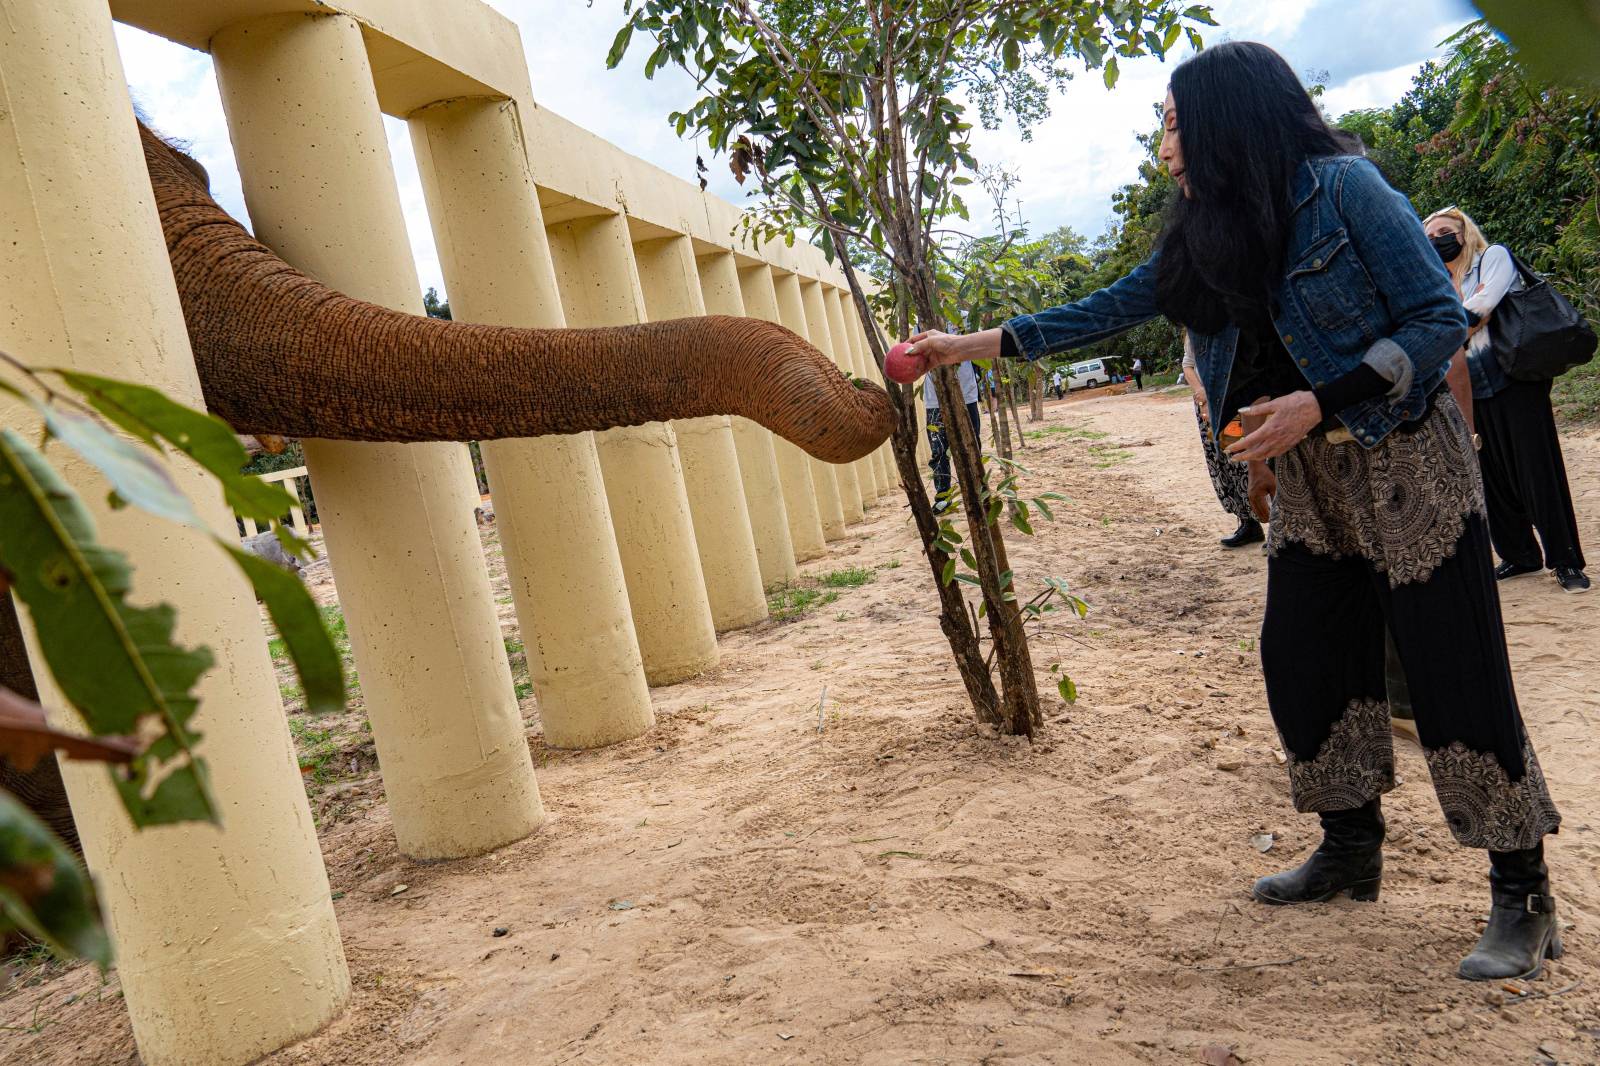 Singer Cher interacts with Kaavan, an elephant transported from Pakistan to Cambodia, at the sanctuary in Oddar Meanchey Province